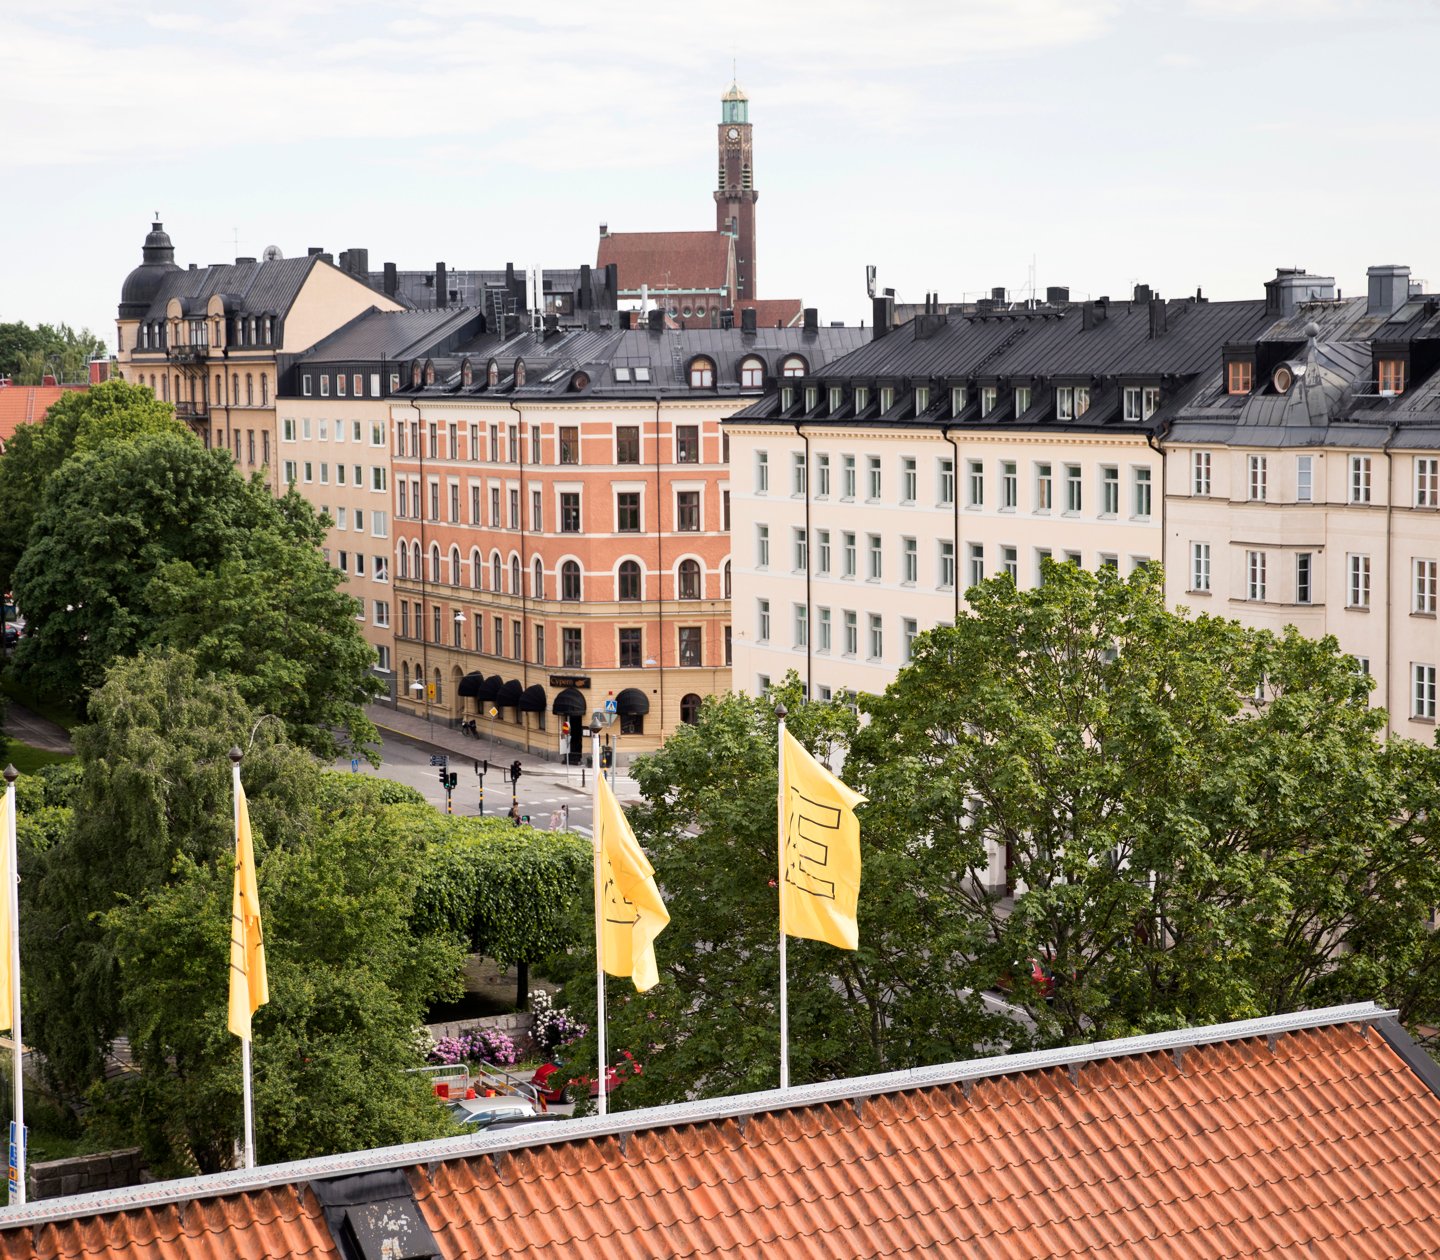 Roof of hotel and yellow Elite flags with trees in front